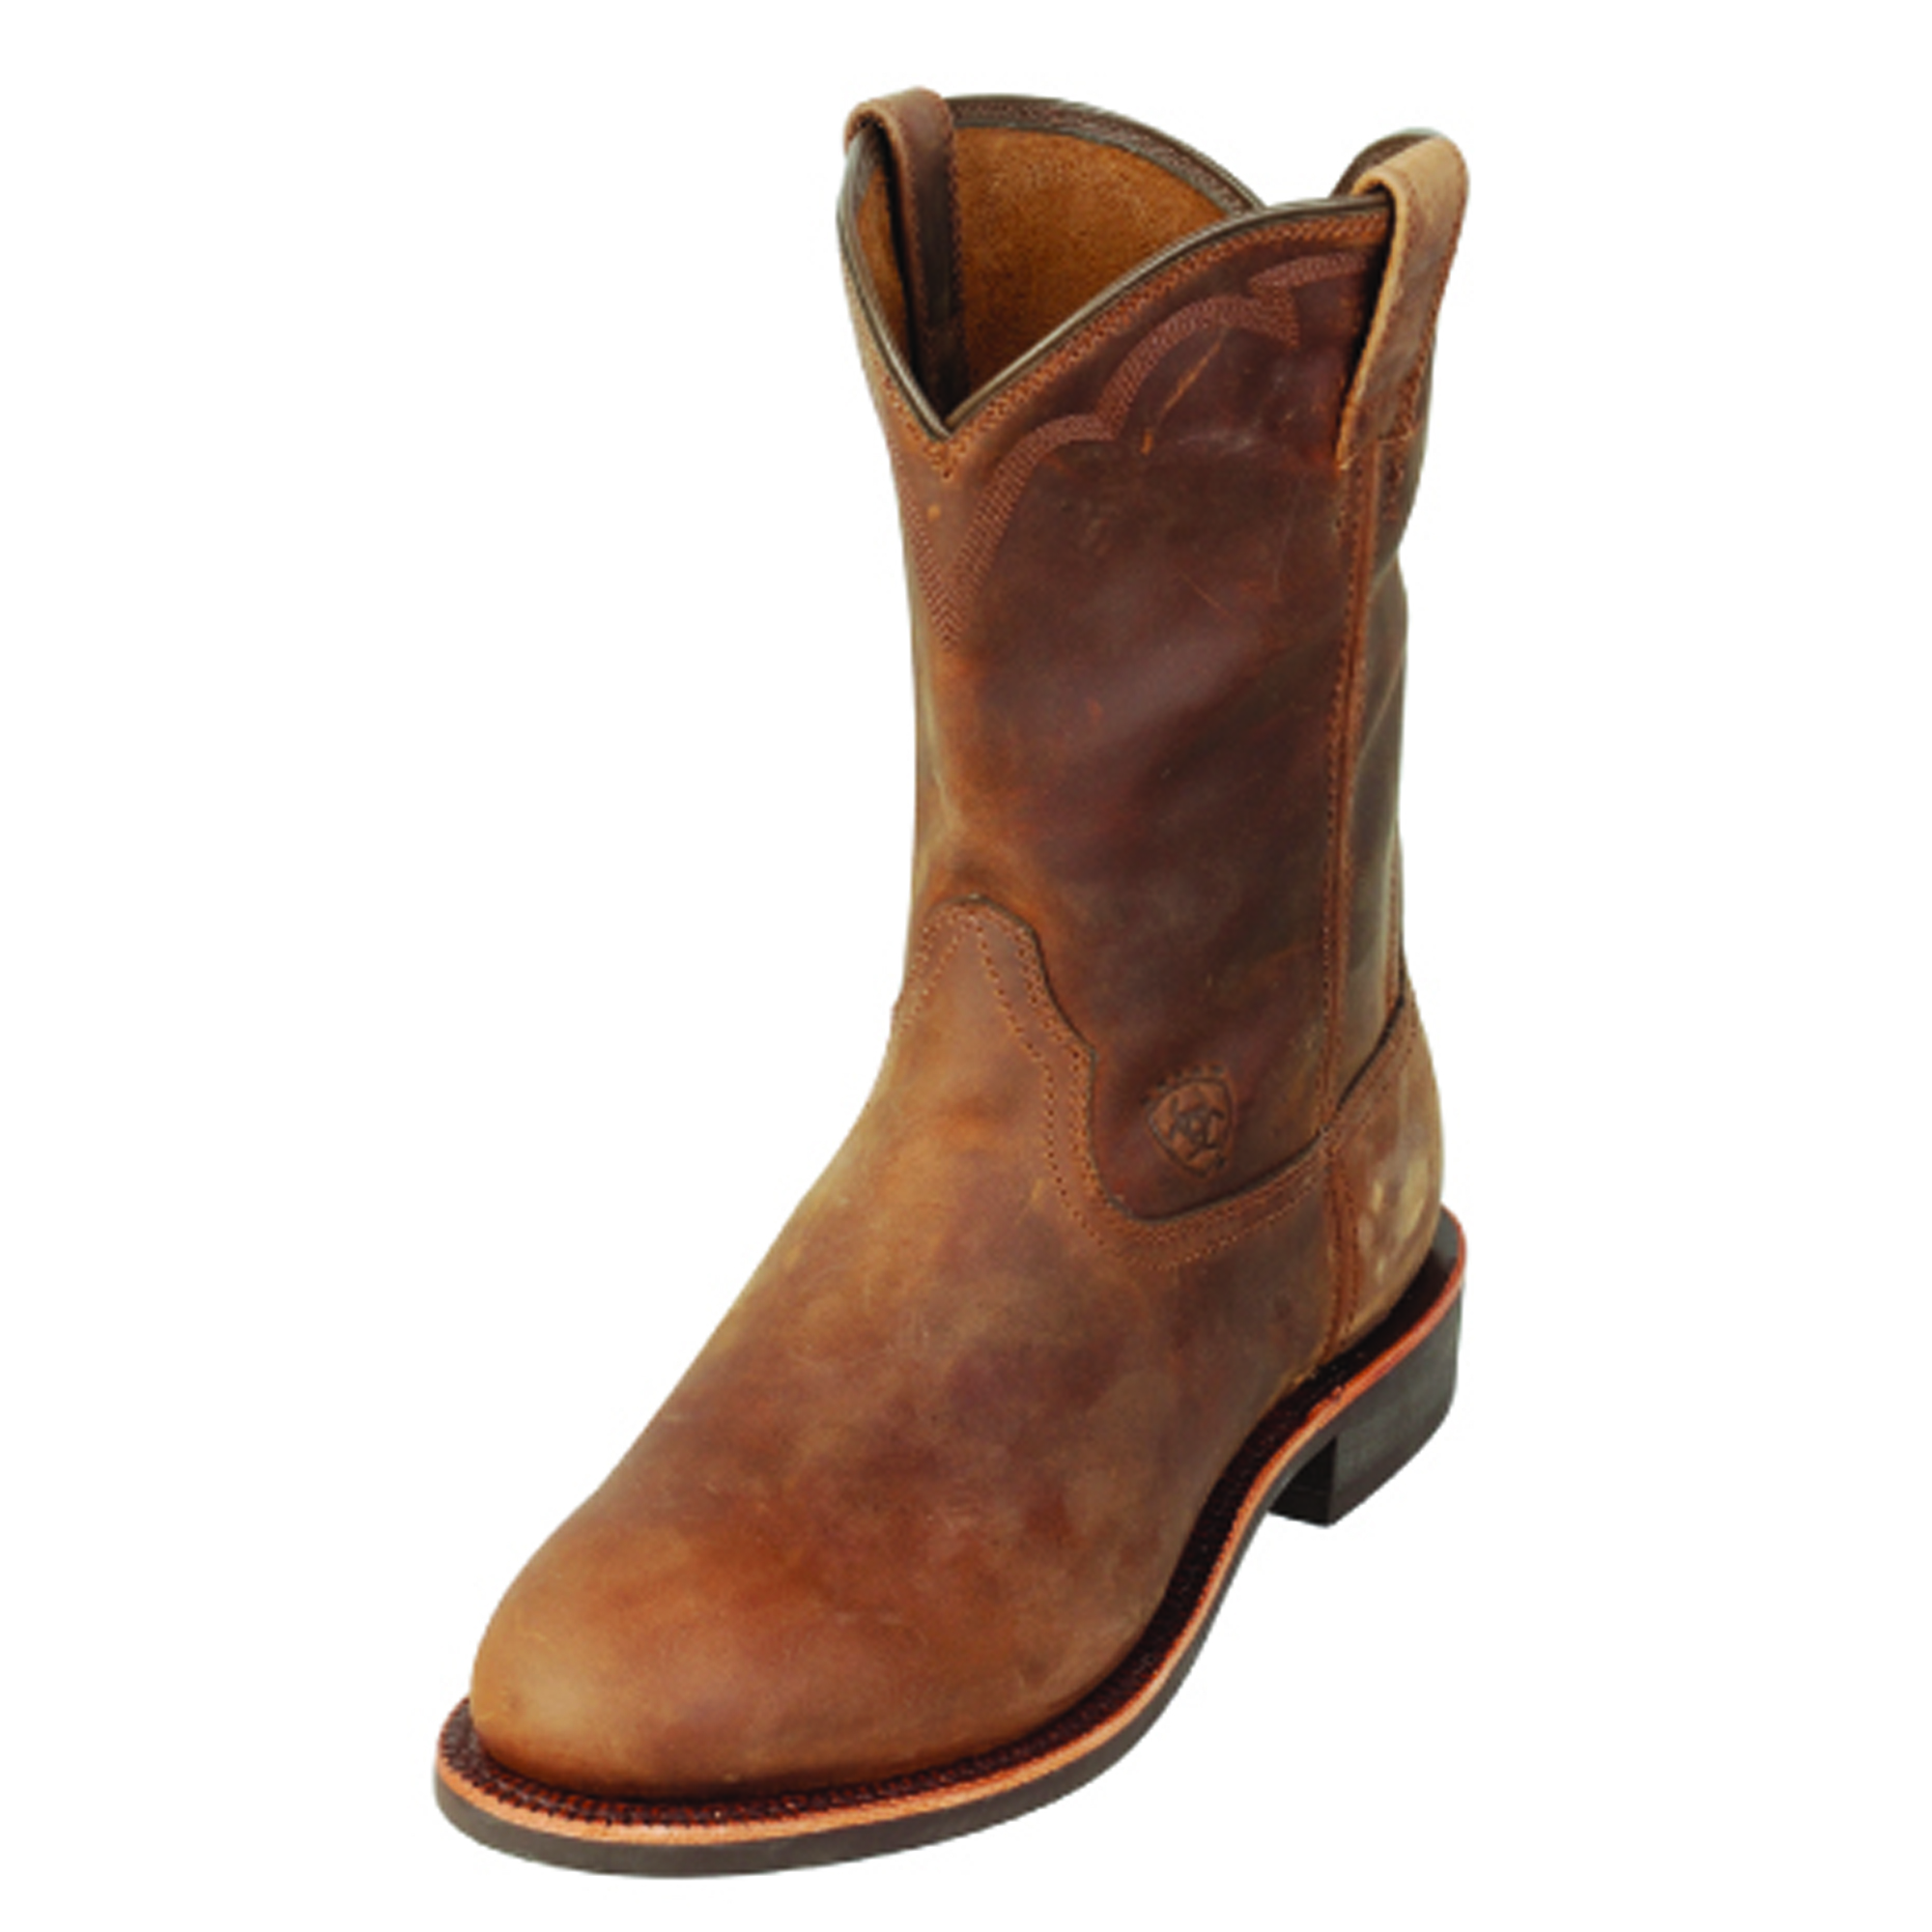 ariat boots size 14 ee